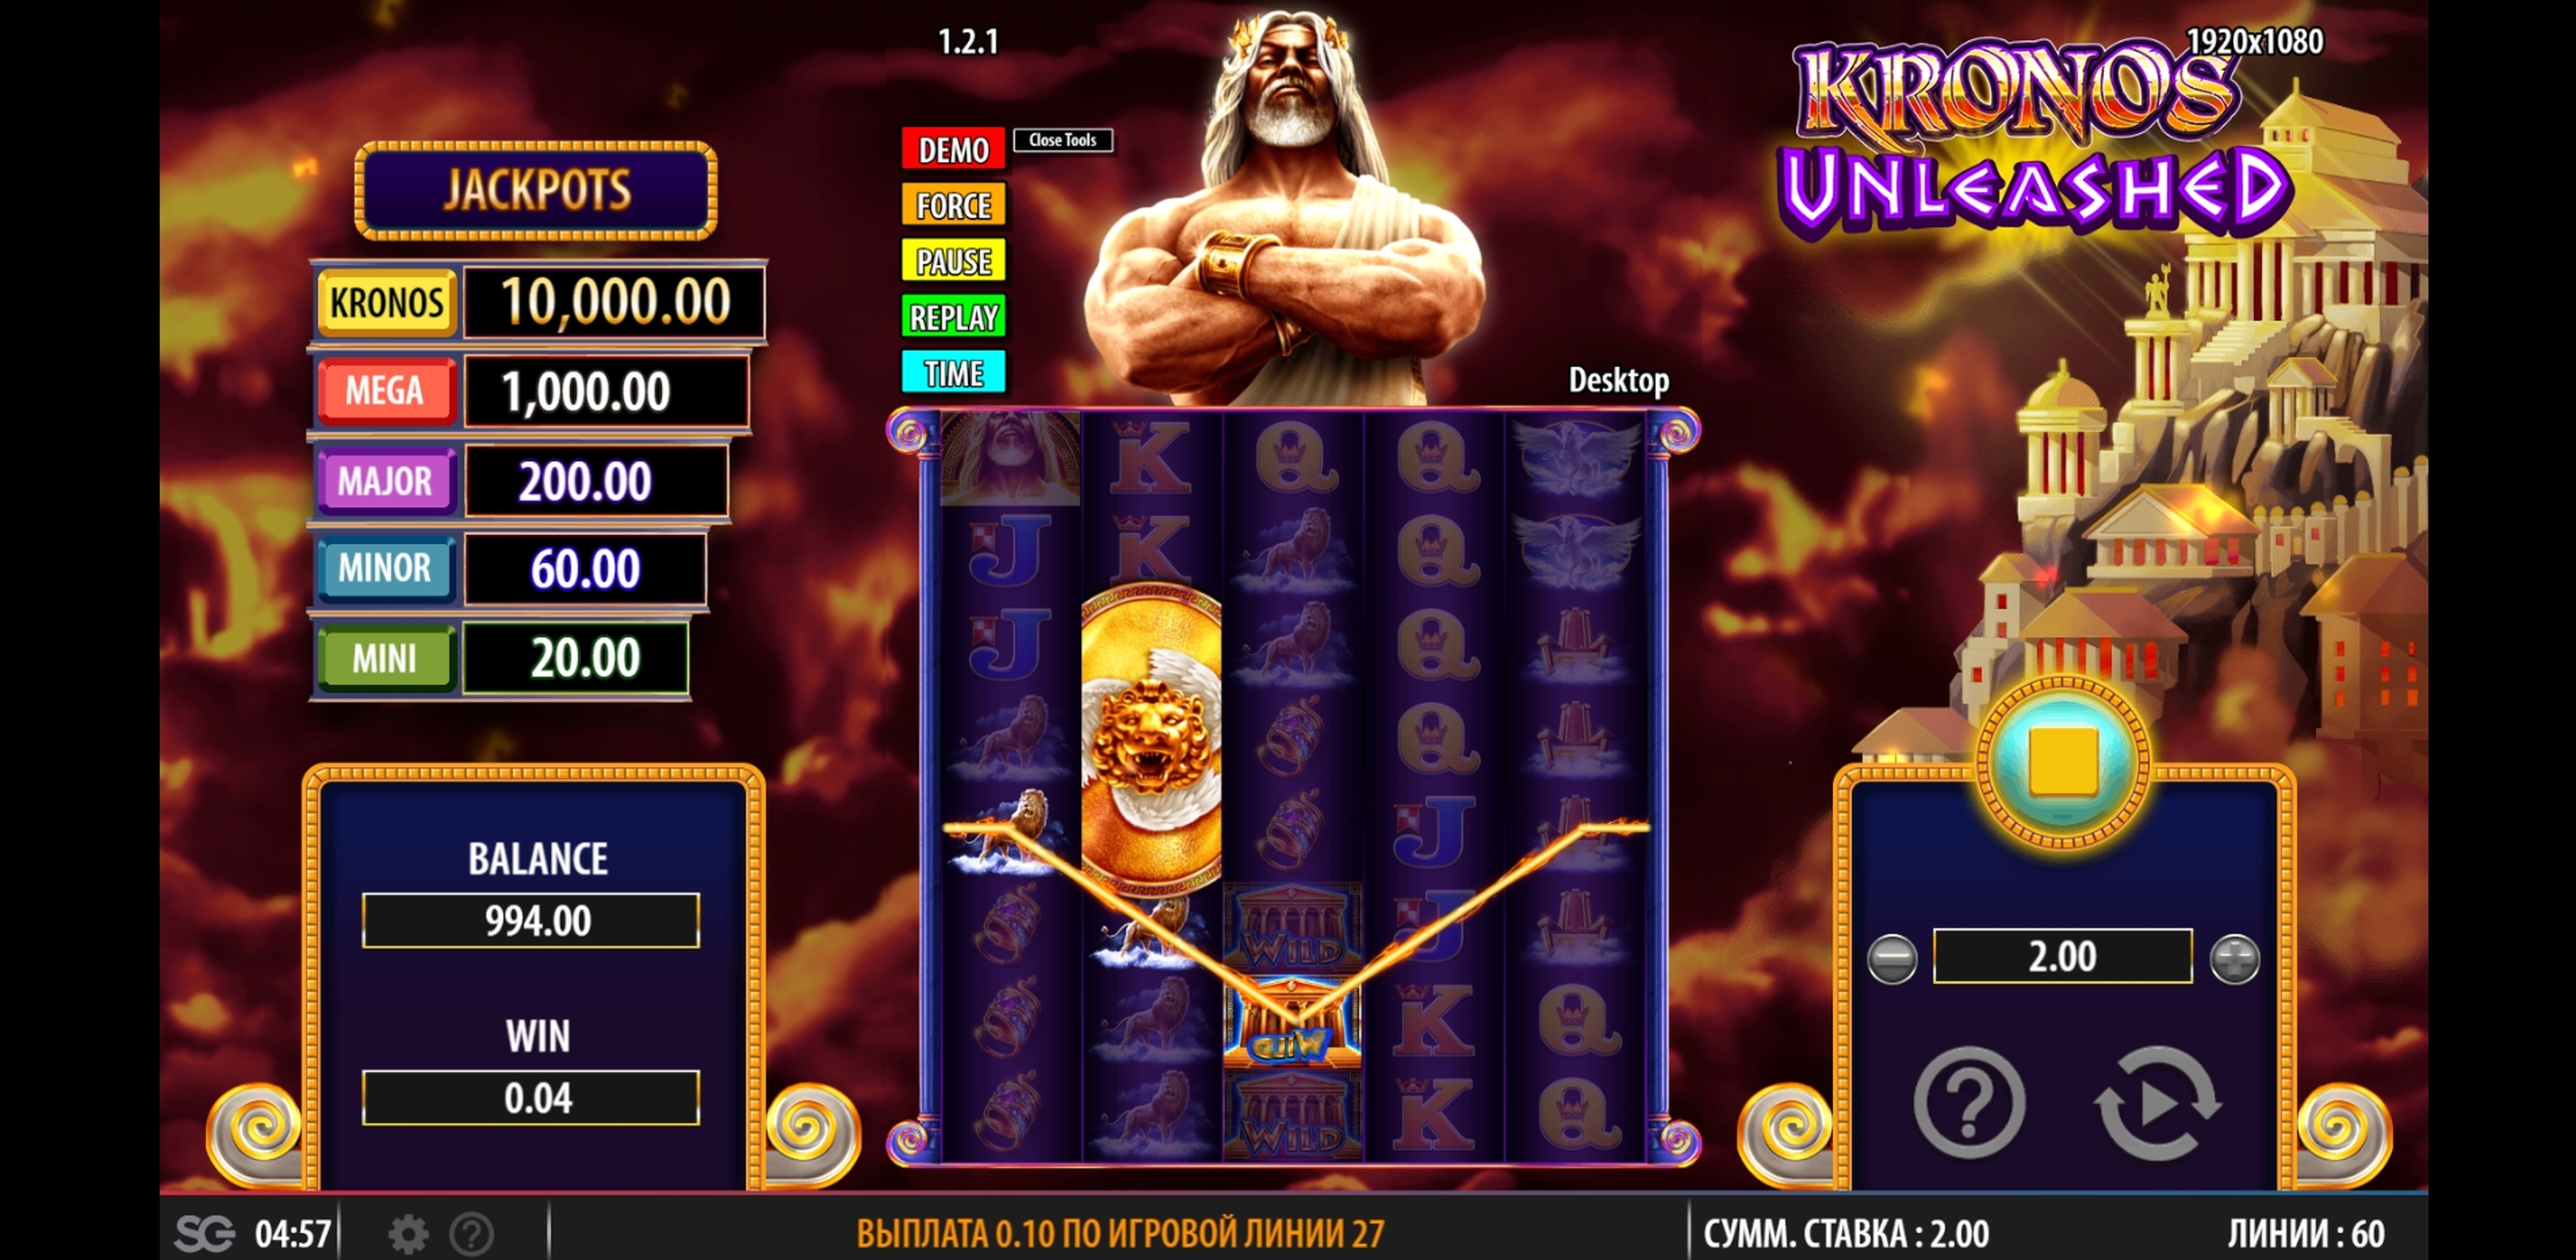 Win Money in Kronos Unleashed Free Slot Game by SG